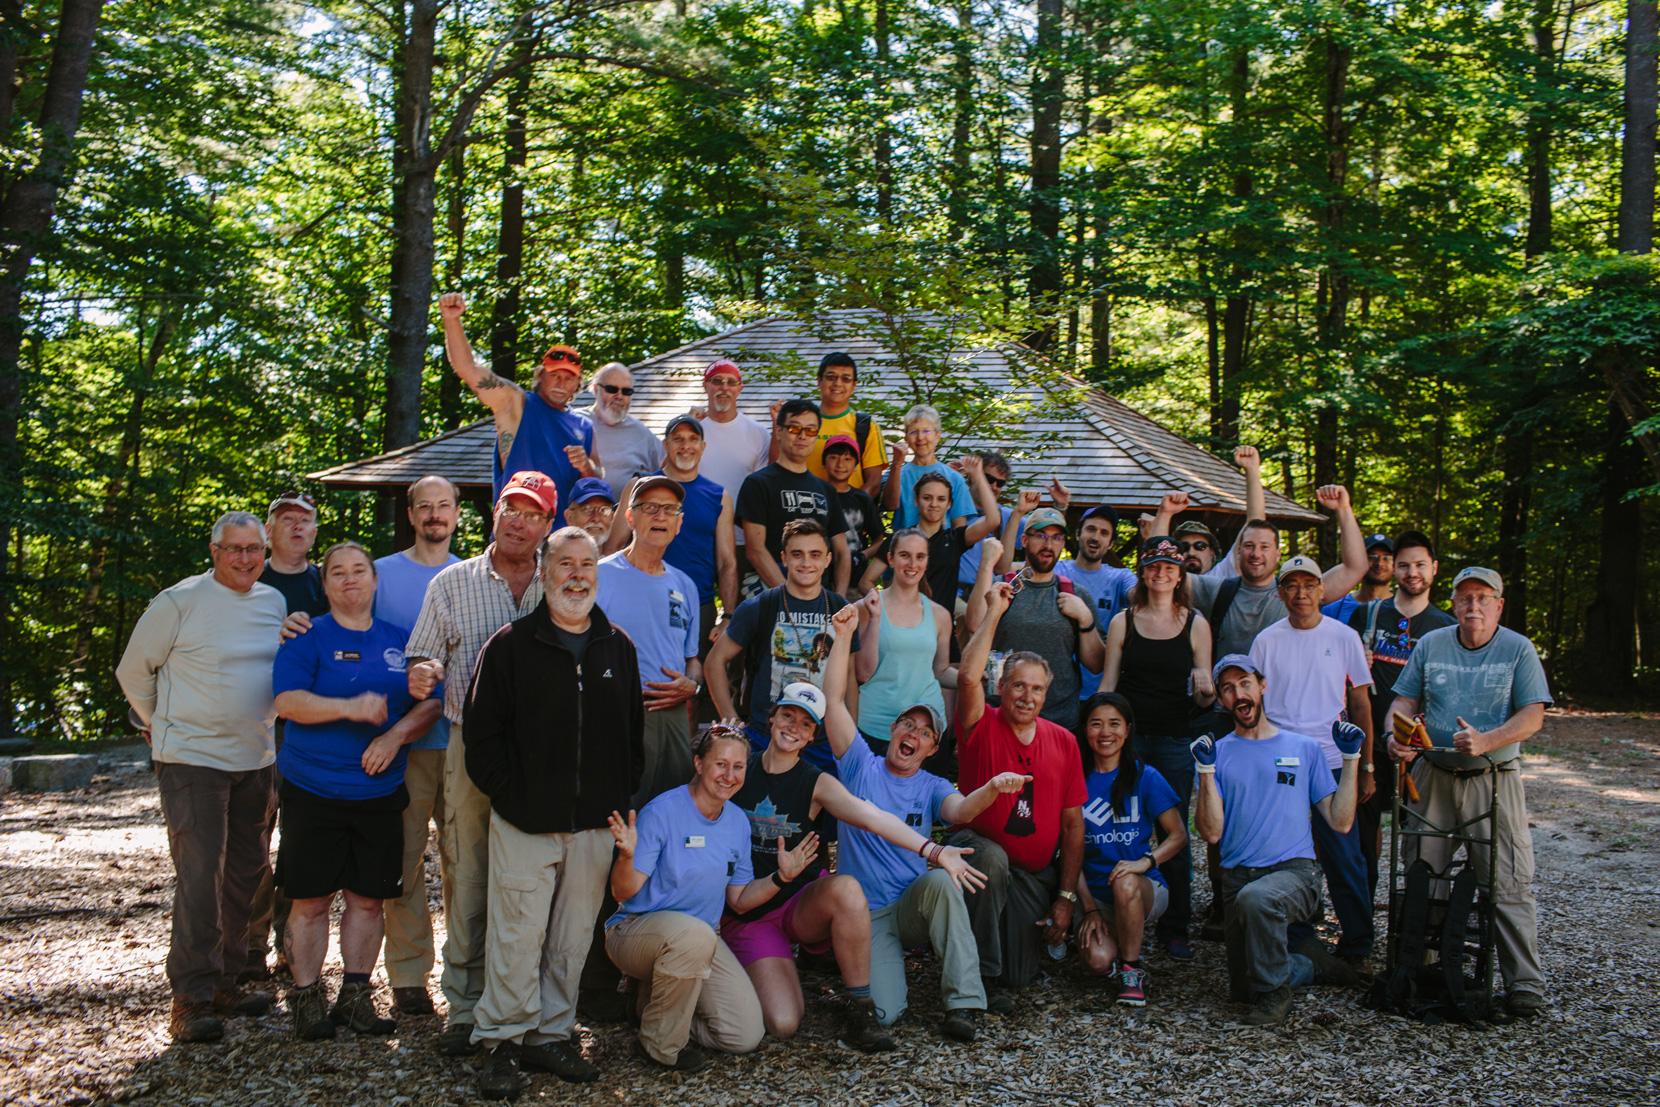 The kick-off to Monadnock Trails Week